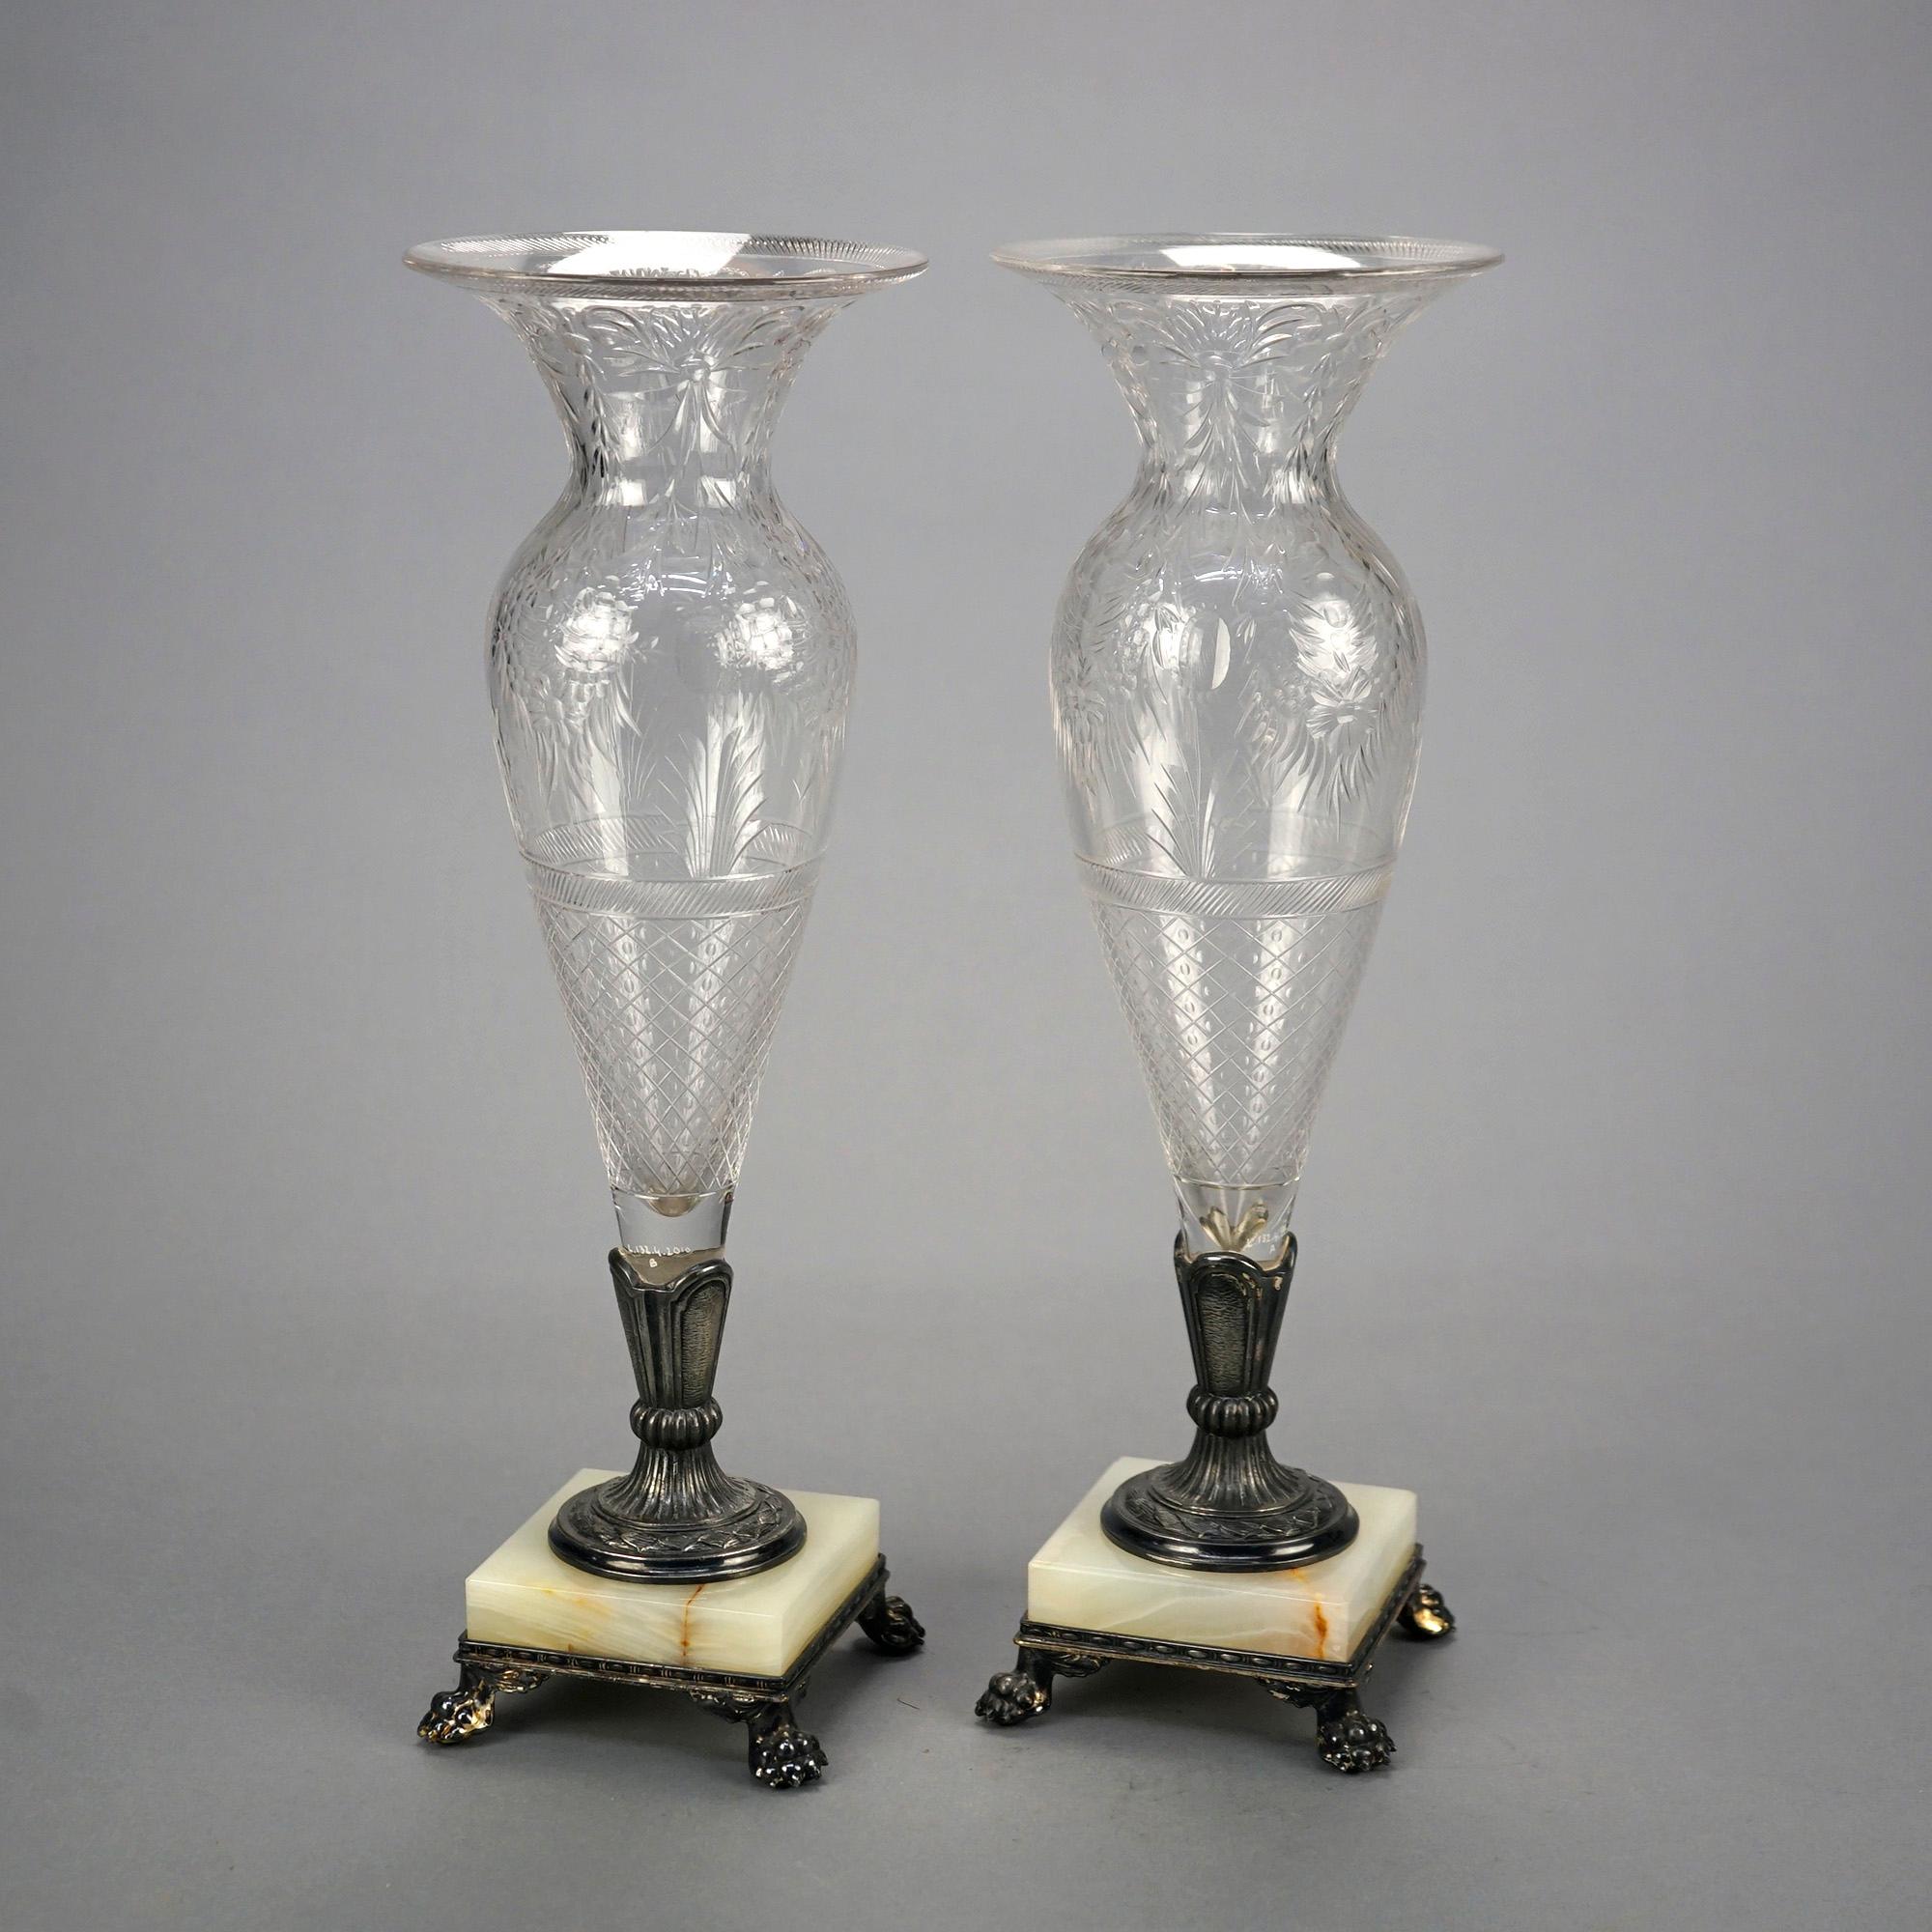 An antique pair of vase by Pairpoint offer crystal vessels having etched floral, foliate and diamond pattern seated in silver plate bases with onyx platforms and cast paw feet, maker signed as photographed, c1900

Measures- 14.5'' H x 5'' W x 5''